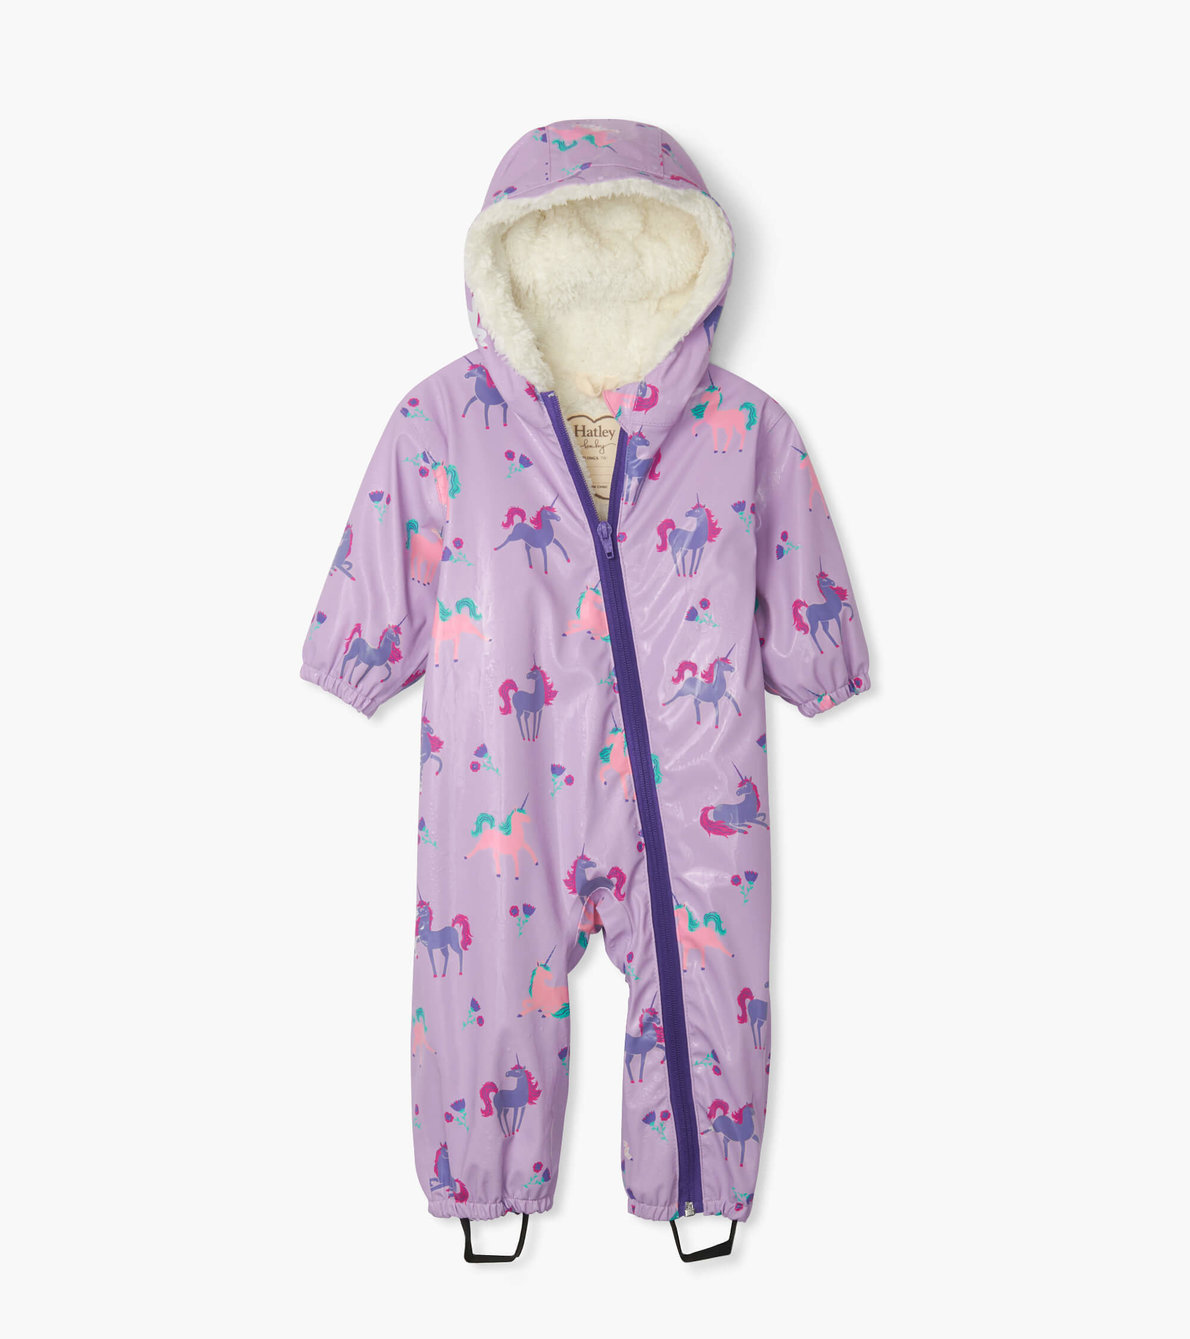 View larger image of Playful Unicorns Sherpa Lined Colour Changing Baby Bundler